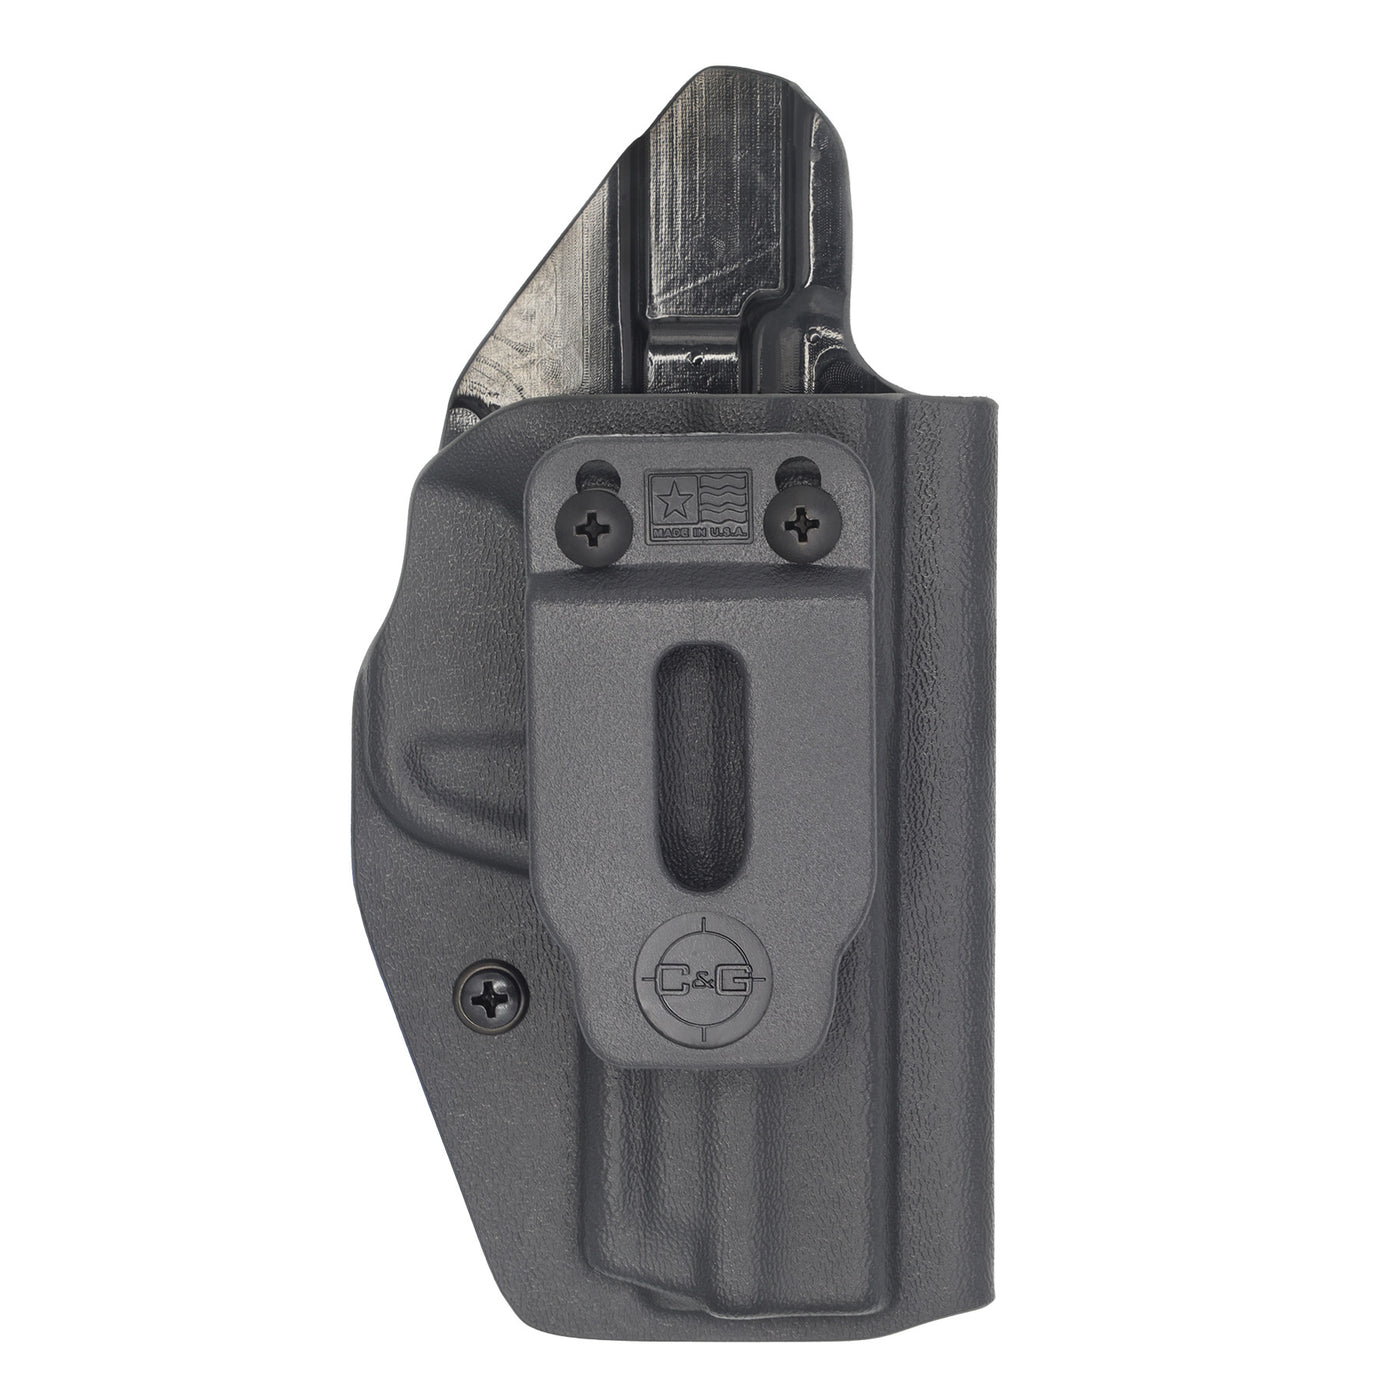 C&G Holsters IWB inside the waistband Holster for the Smith & Wesson M&P Shield EZ